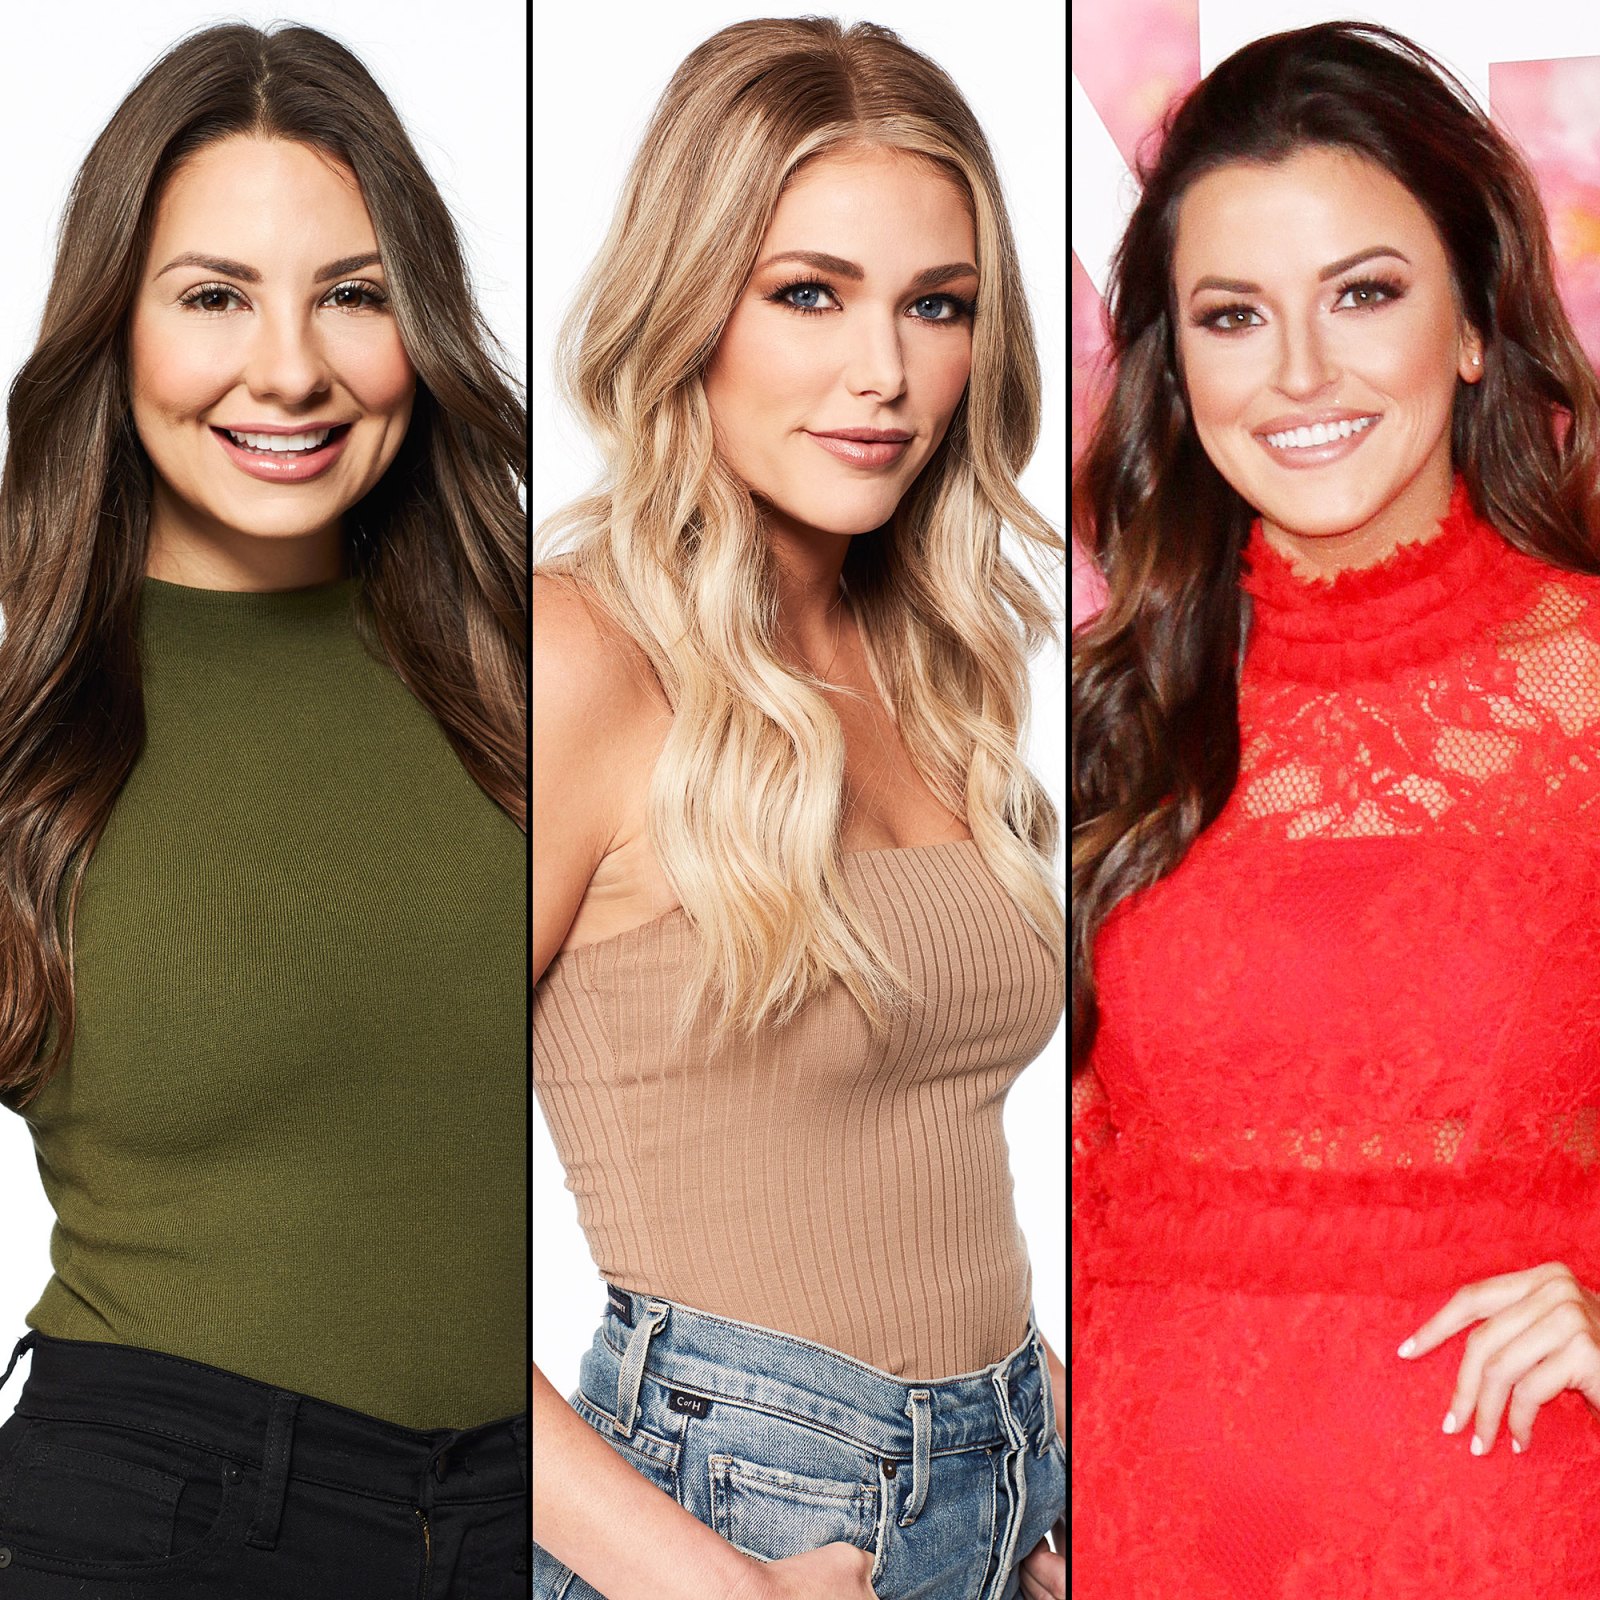 Kelley Kelsey and Tia Booth Bachelor Nation Weighs In On Who Will Be the Next Bachelorette